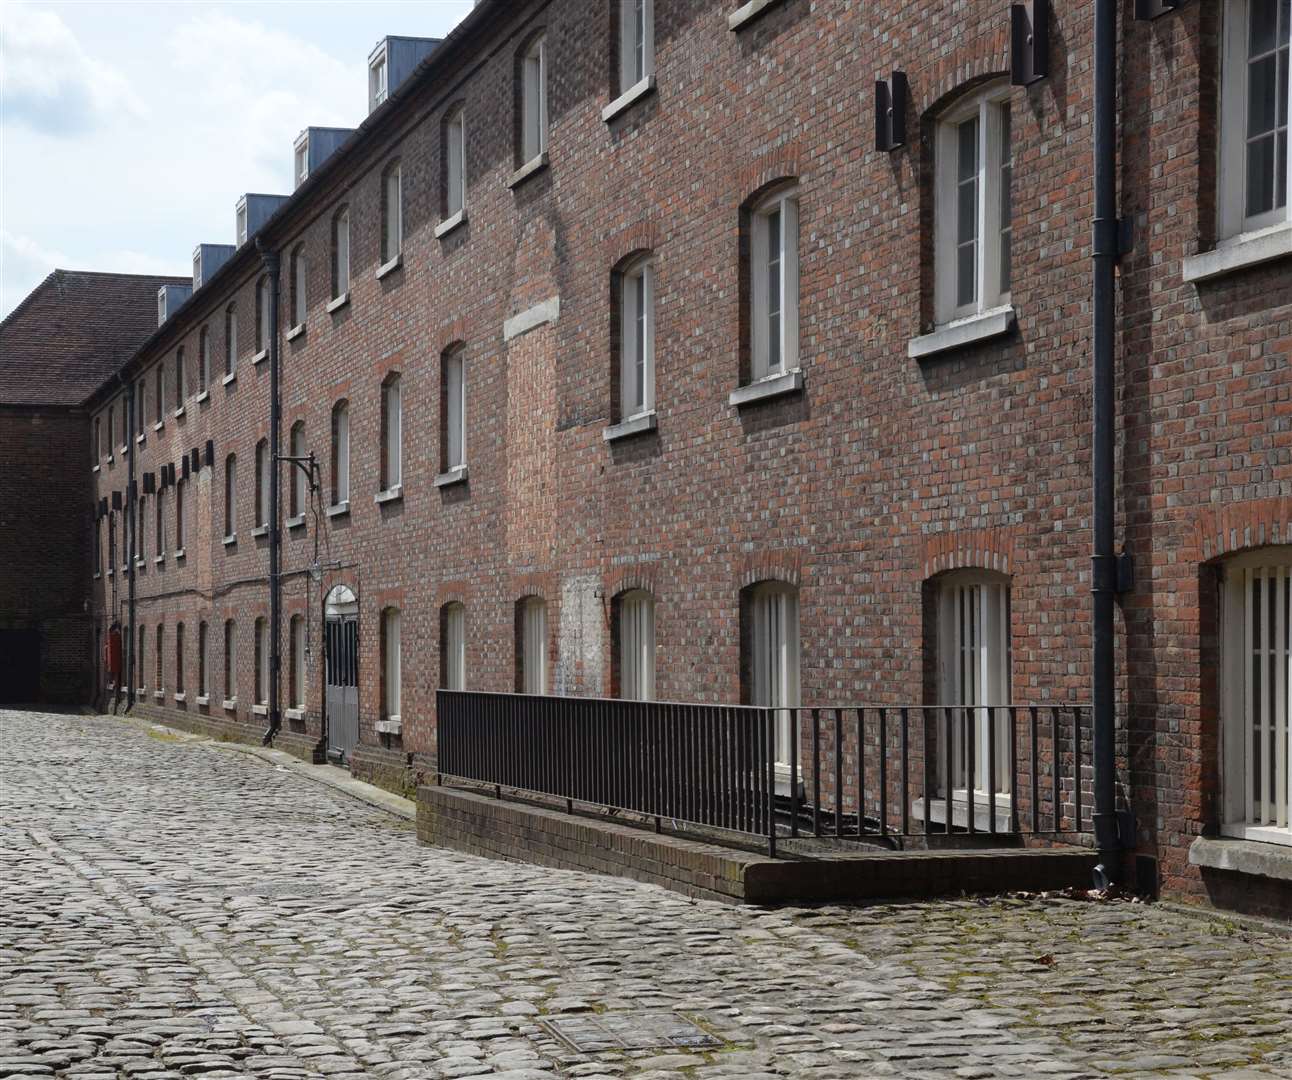 The cobbled road alongside The Ropery is often used during the filming of Call the Midwife at Chatham Historic Dockyard. Picture: Chris Davey